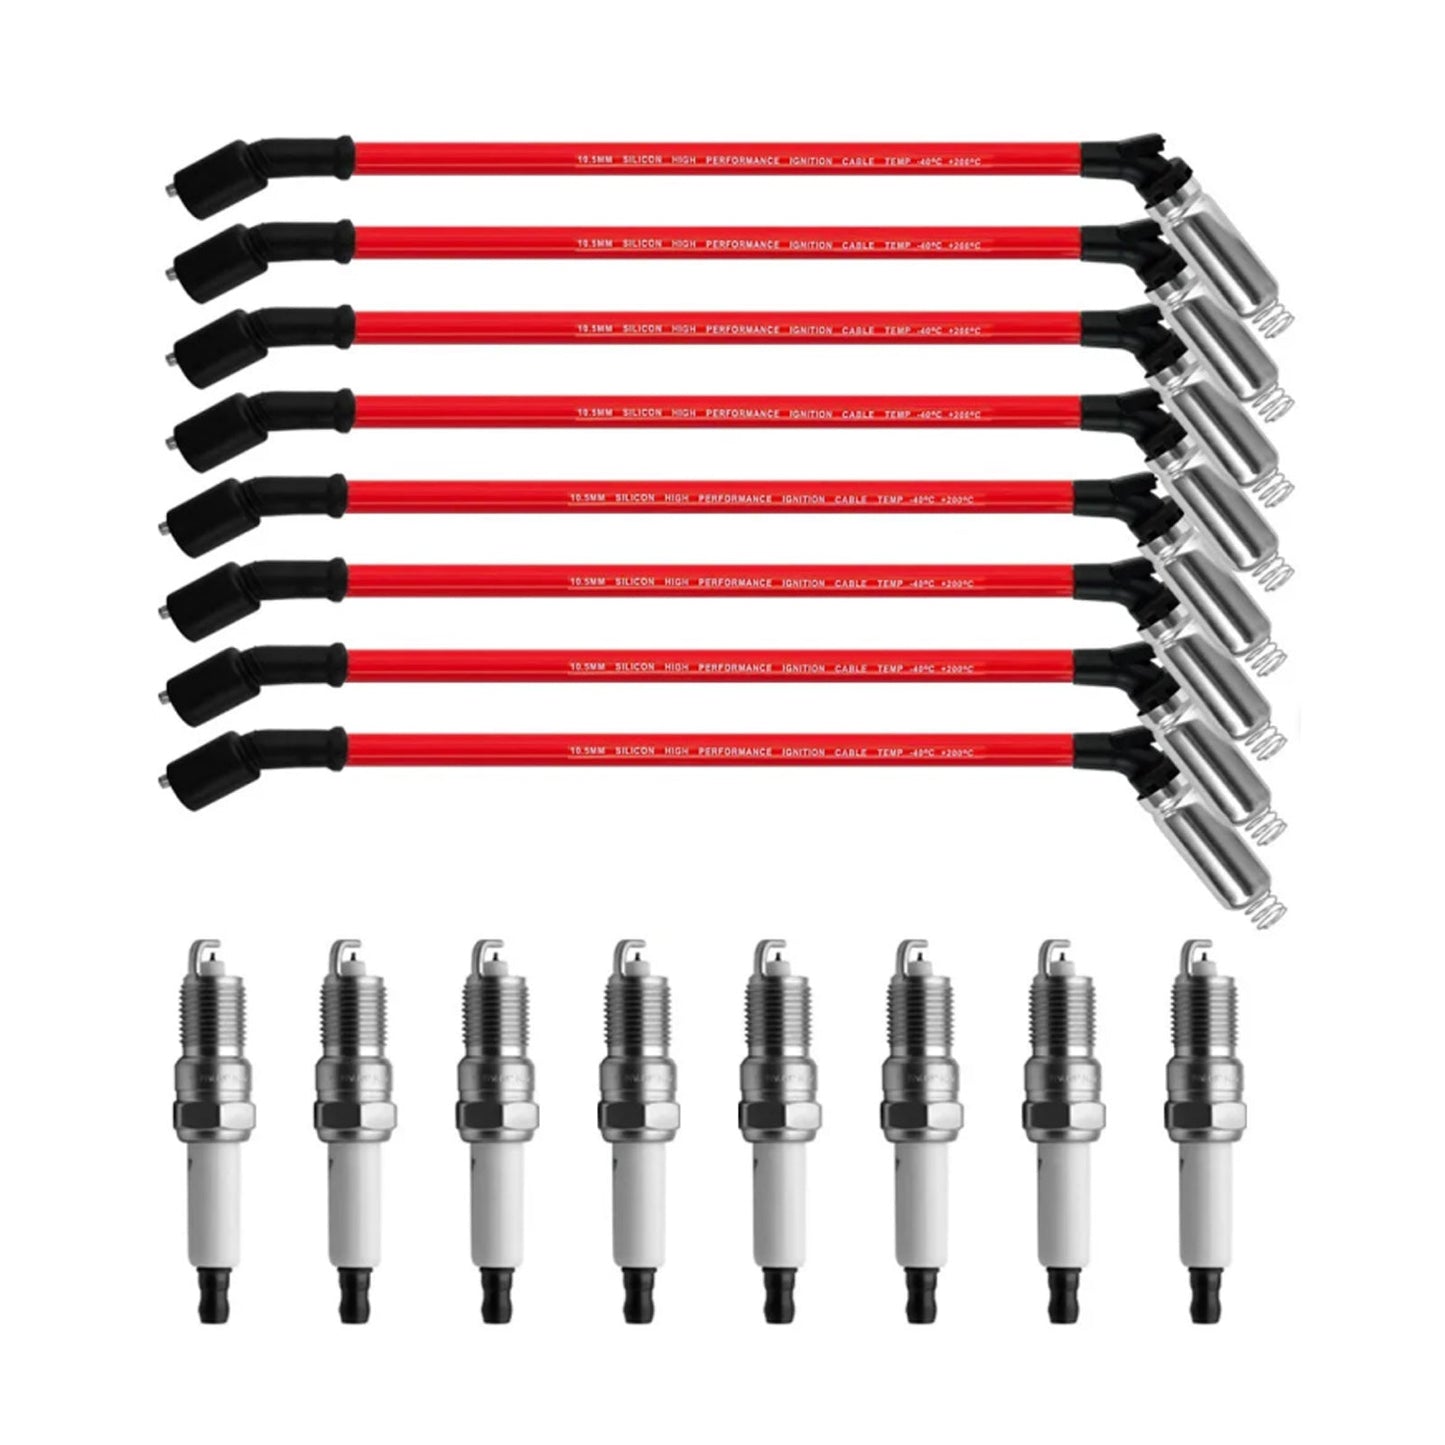 8x Spark Plugs +Wires 10.5mm Set 19299585 For Chevy GMC 4.8L 5.3L 6.0L V8